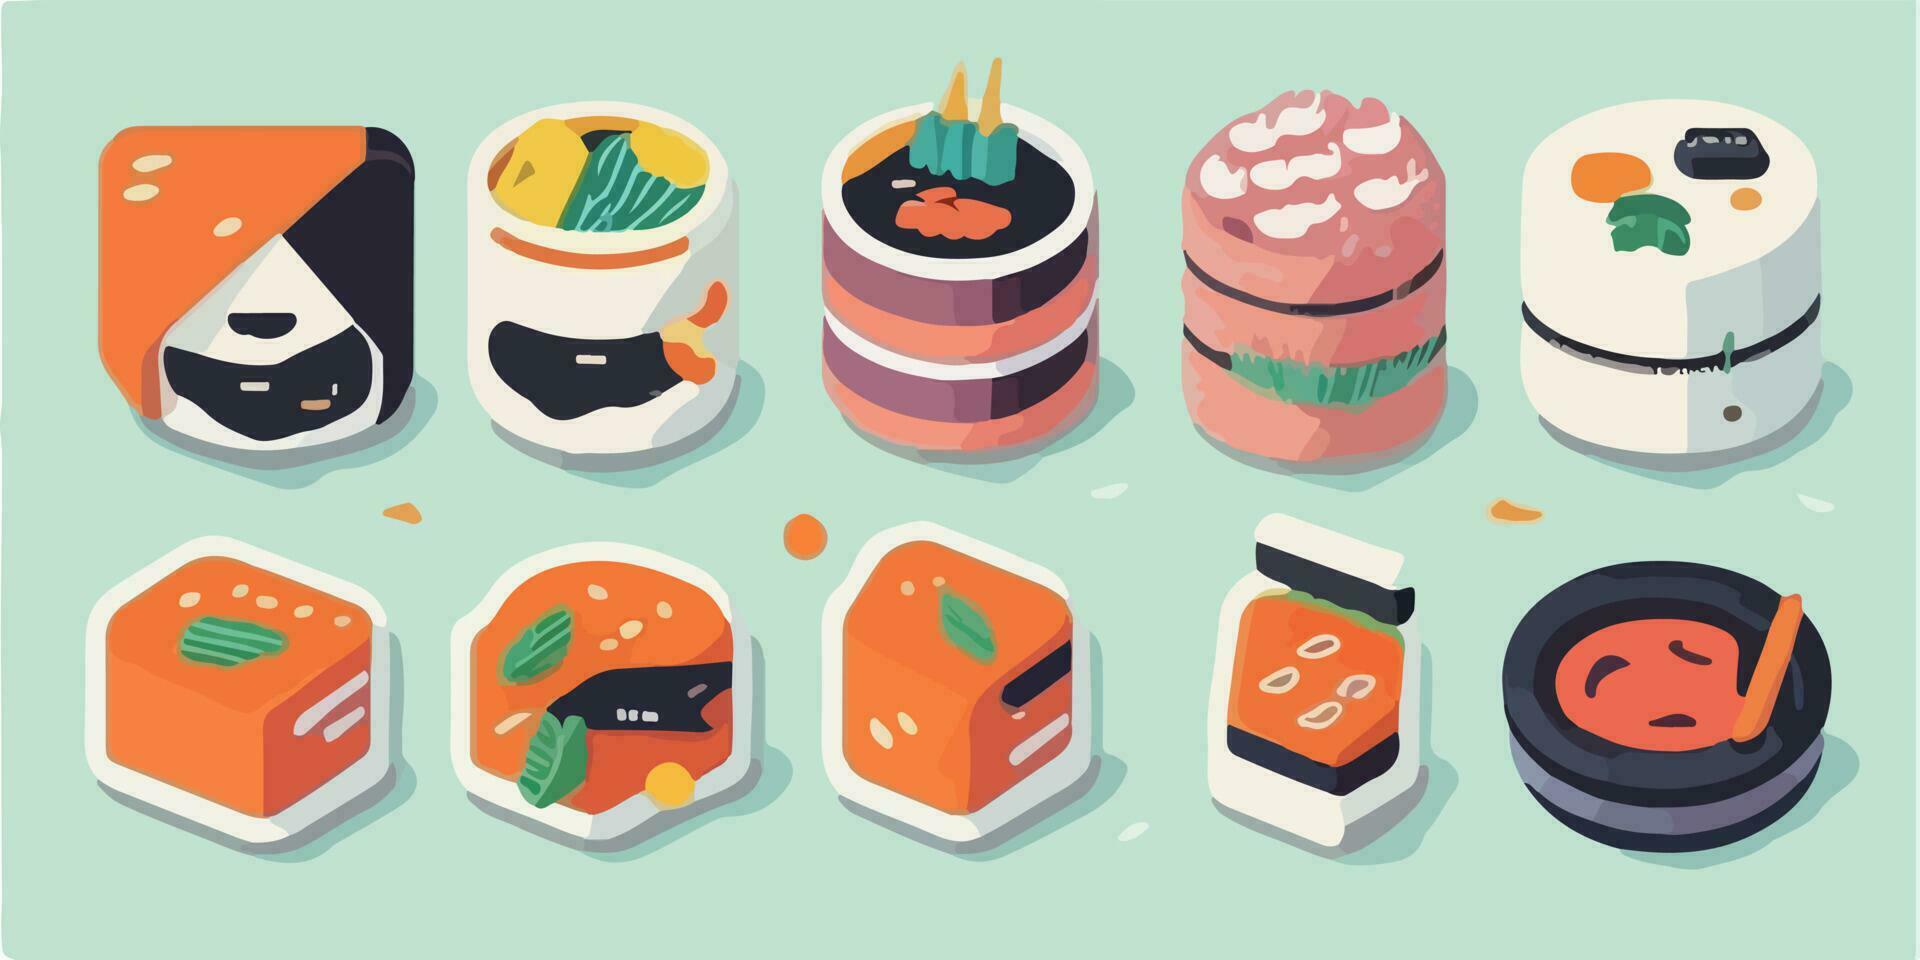 Flavors of Japan, Vibrant Cartoon Illustration of a Colorful Sushi Spread vector